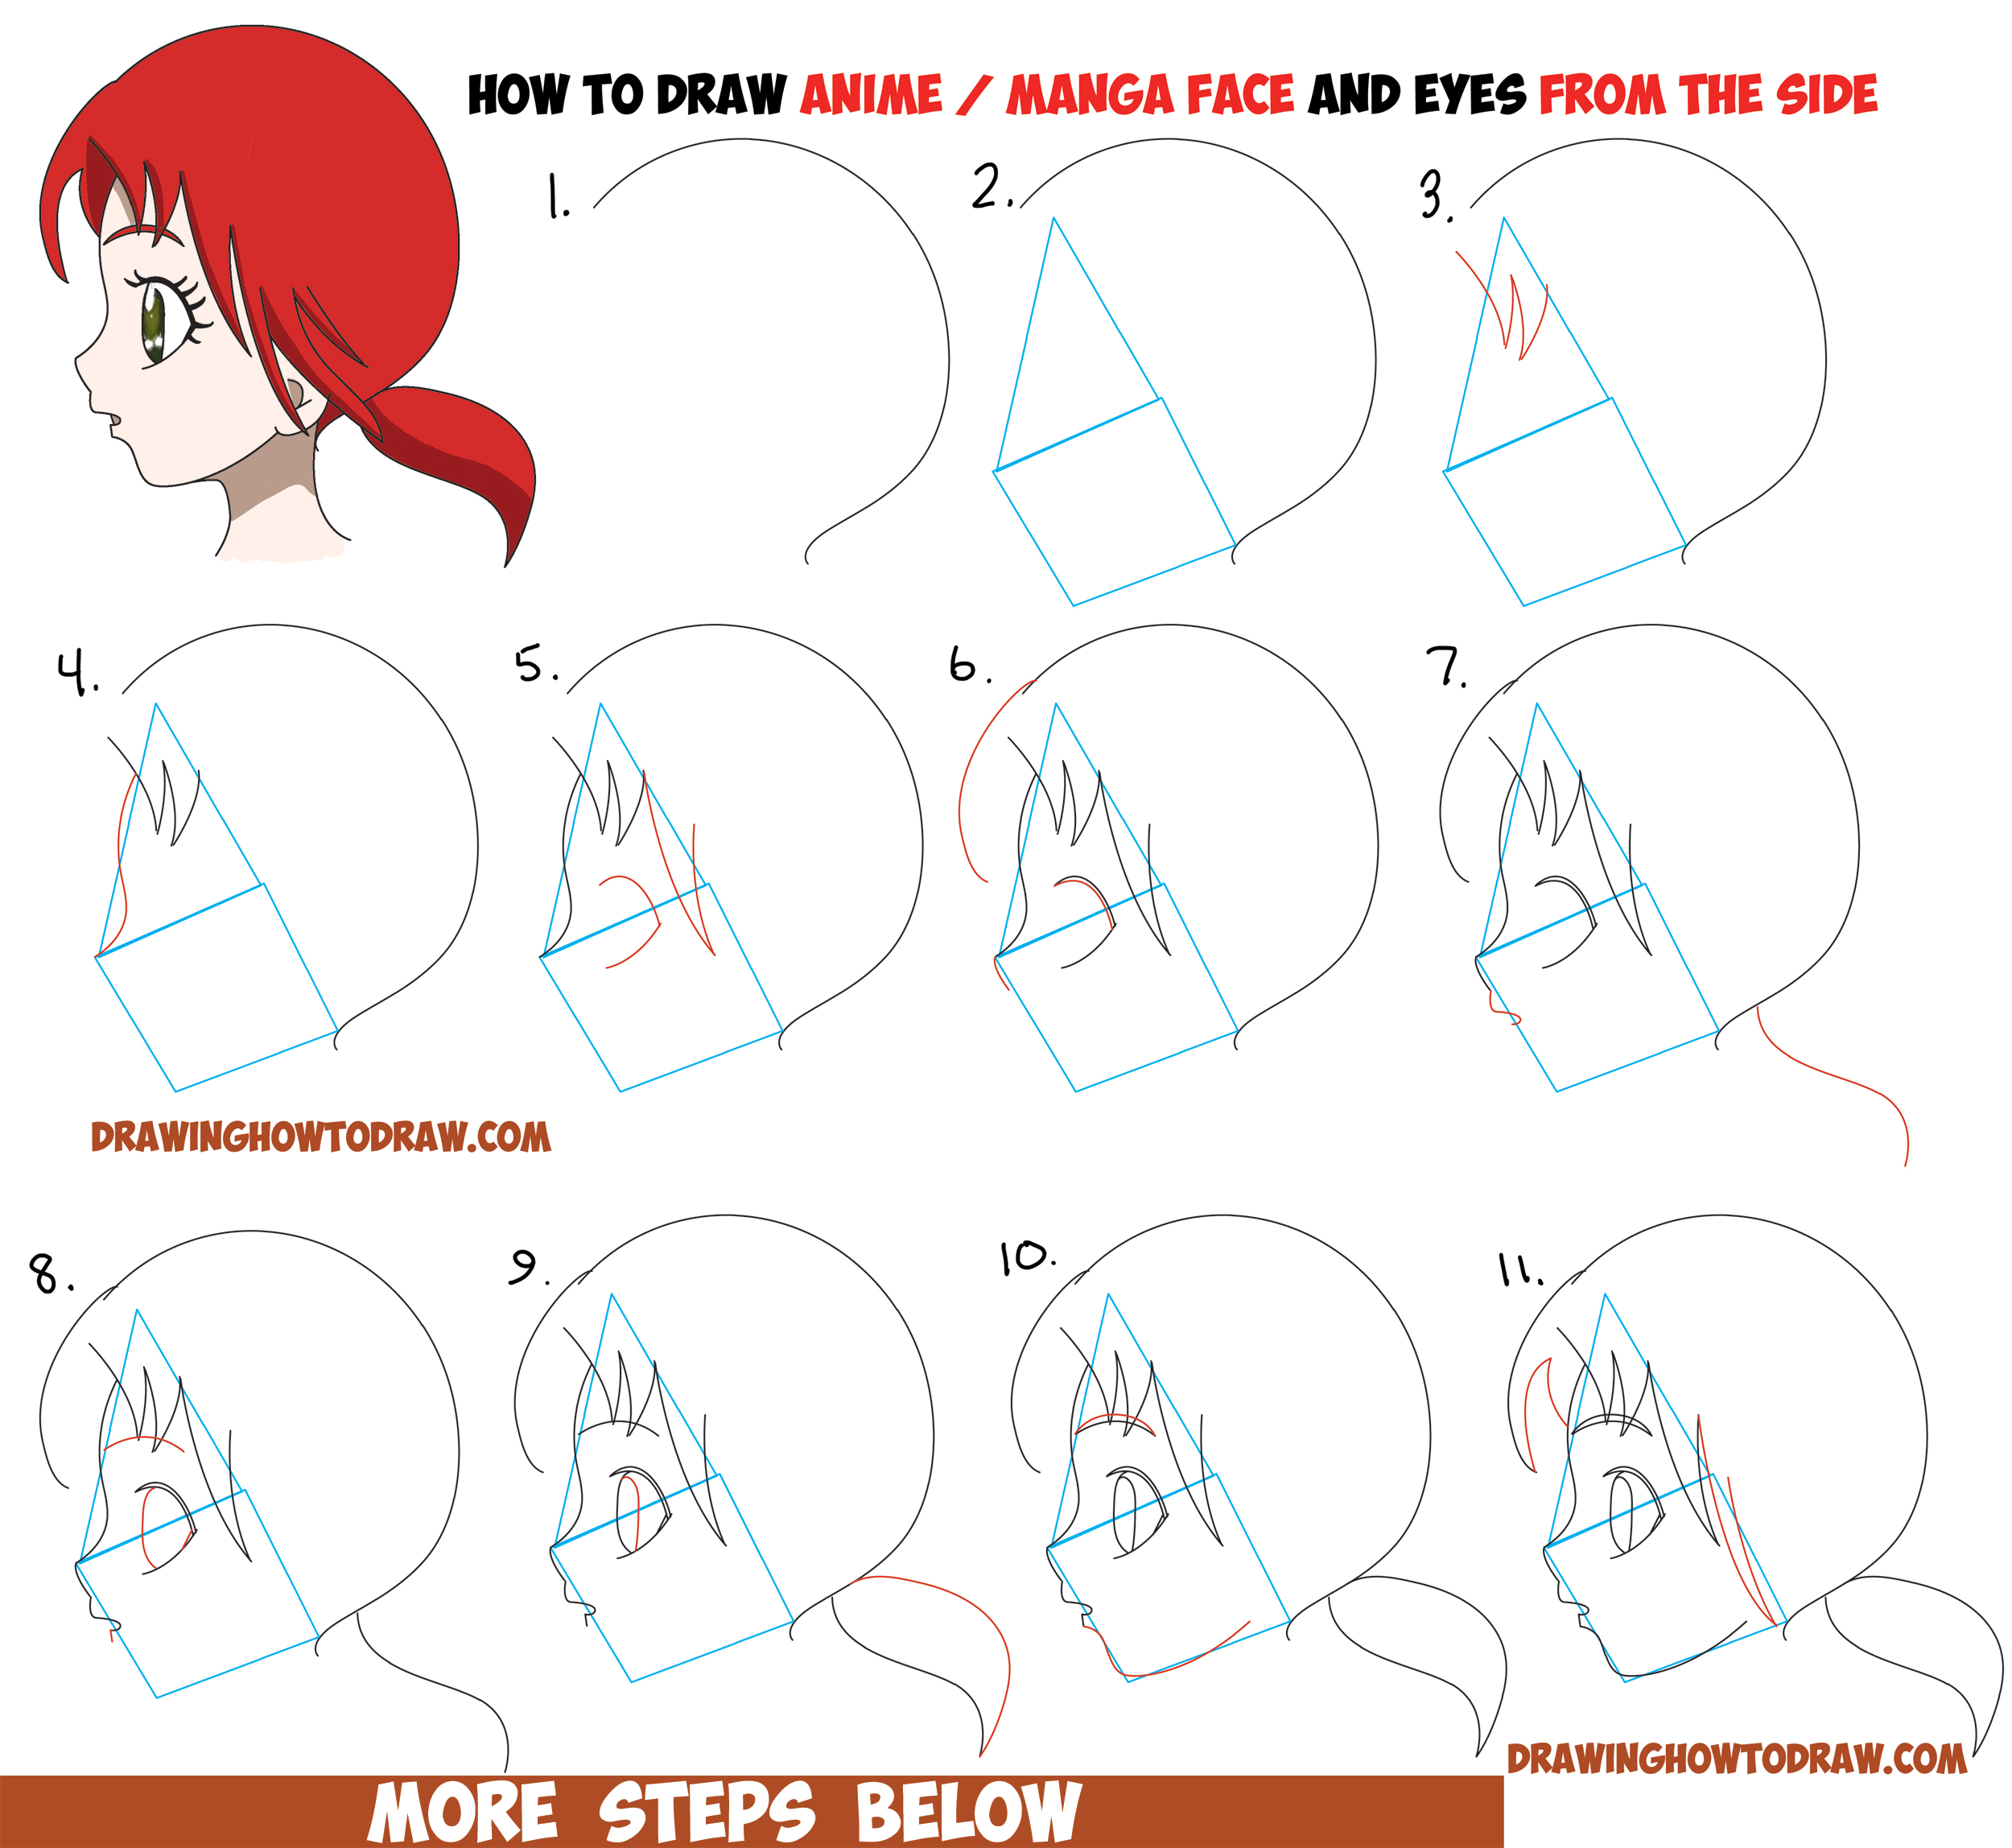 How to Draw an Anime / Manga Face and Eyes from the Side in Profile View Easy Step by Step Drawing Tutorial